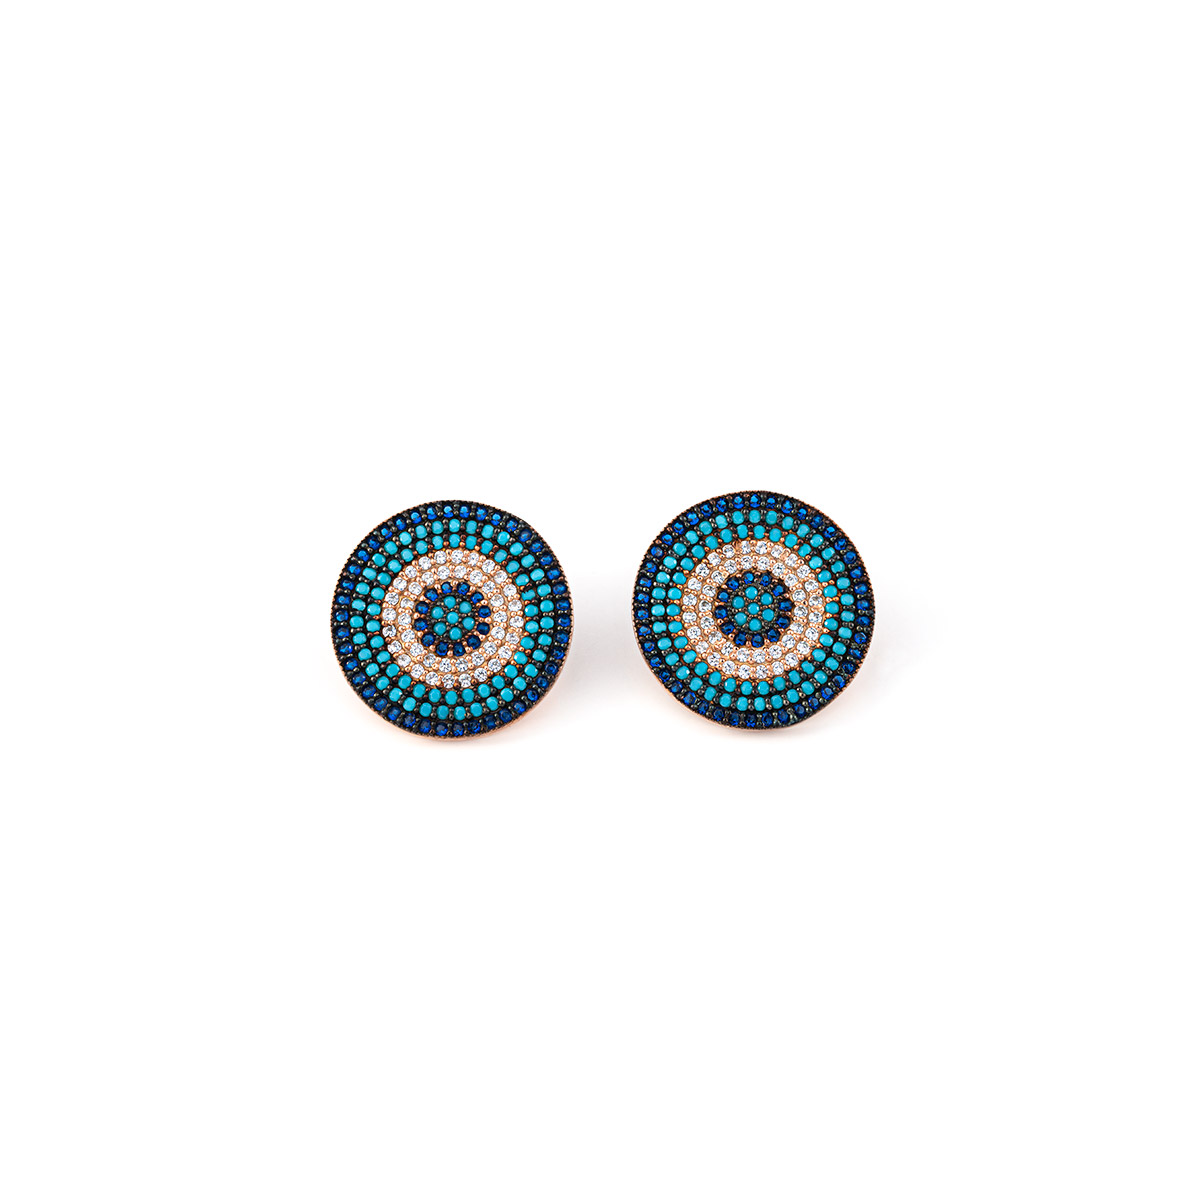 Evil Eye Earrings - 925 Silver with Turquoise and Zircon